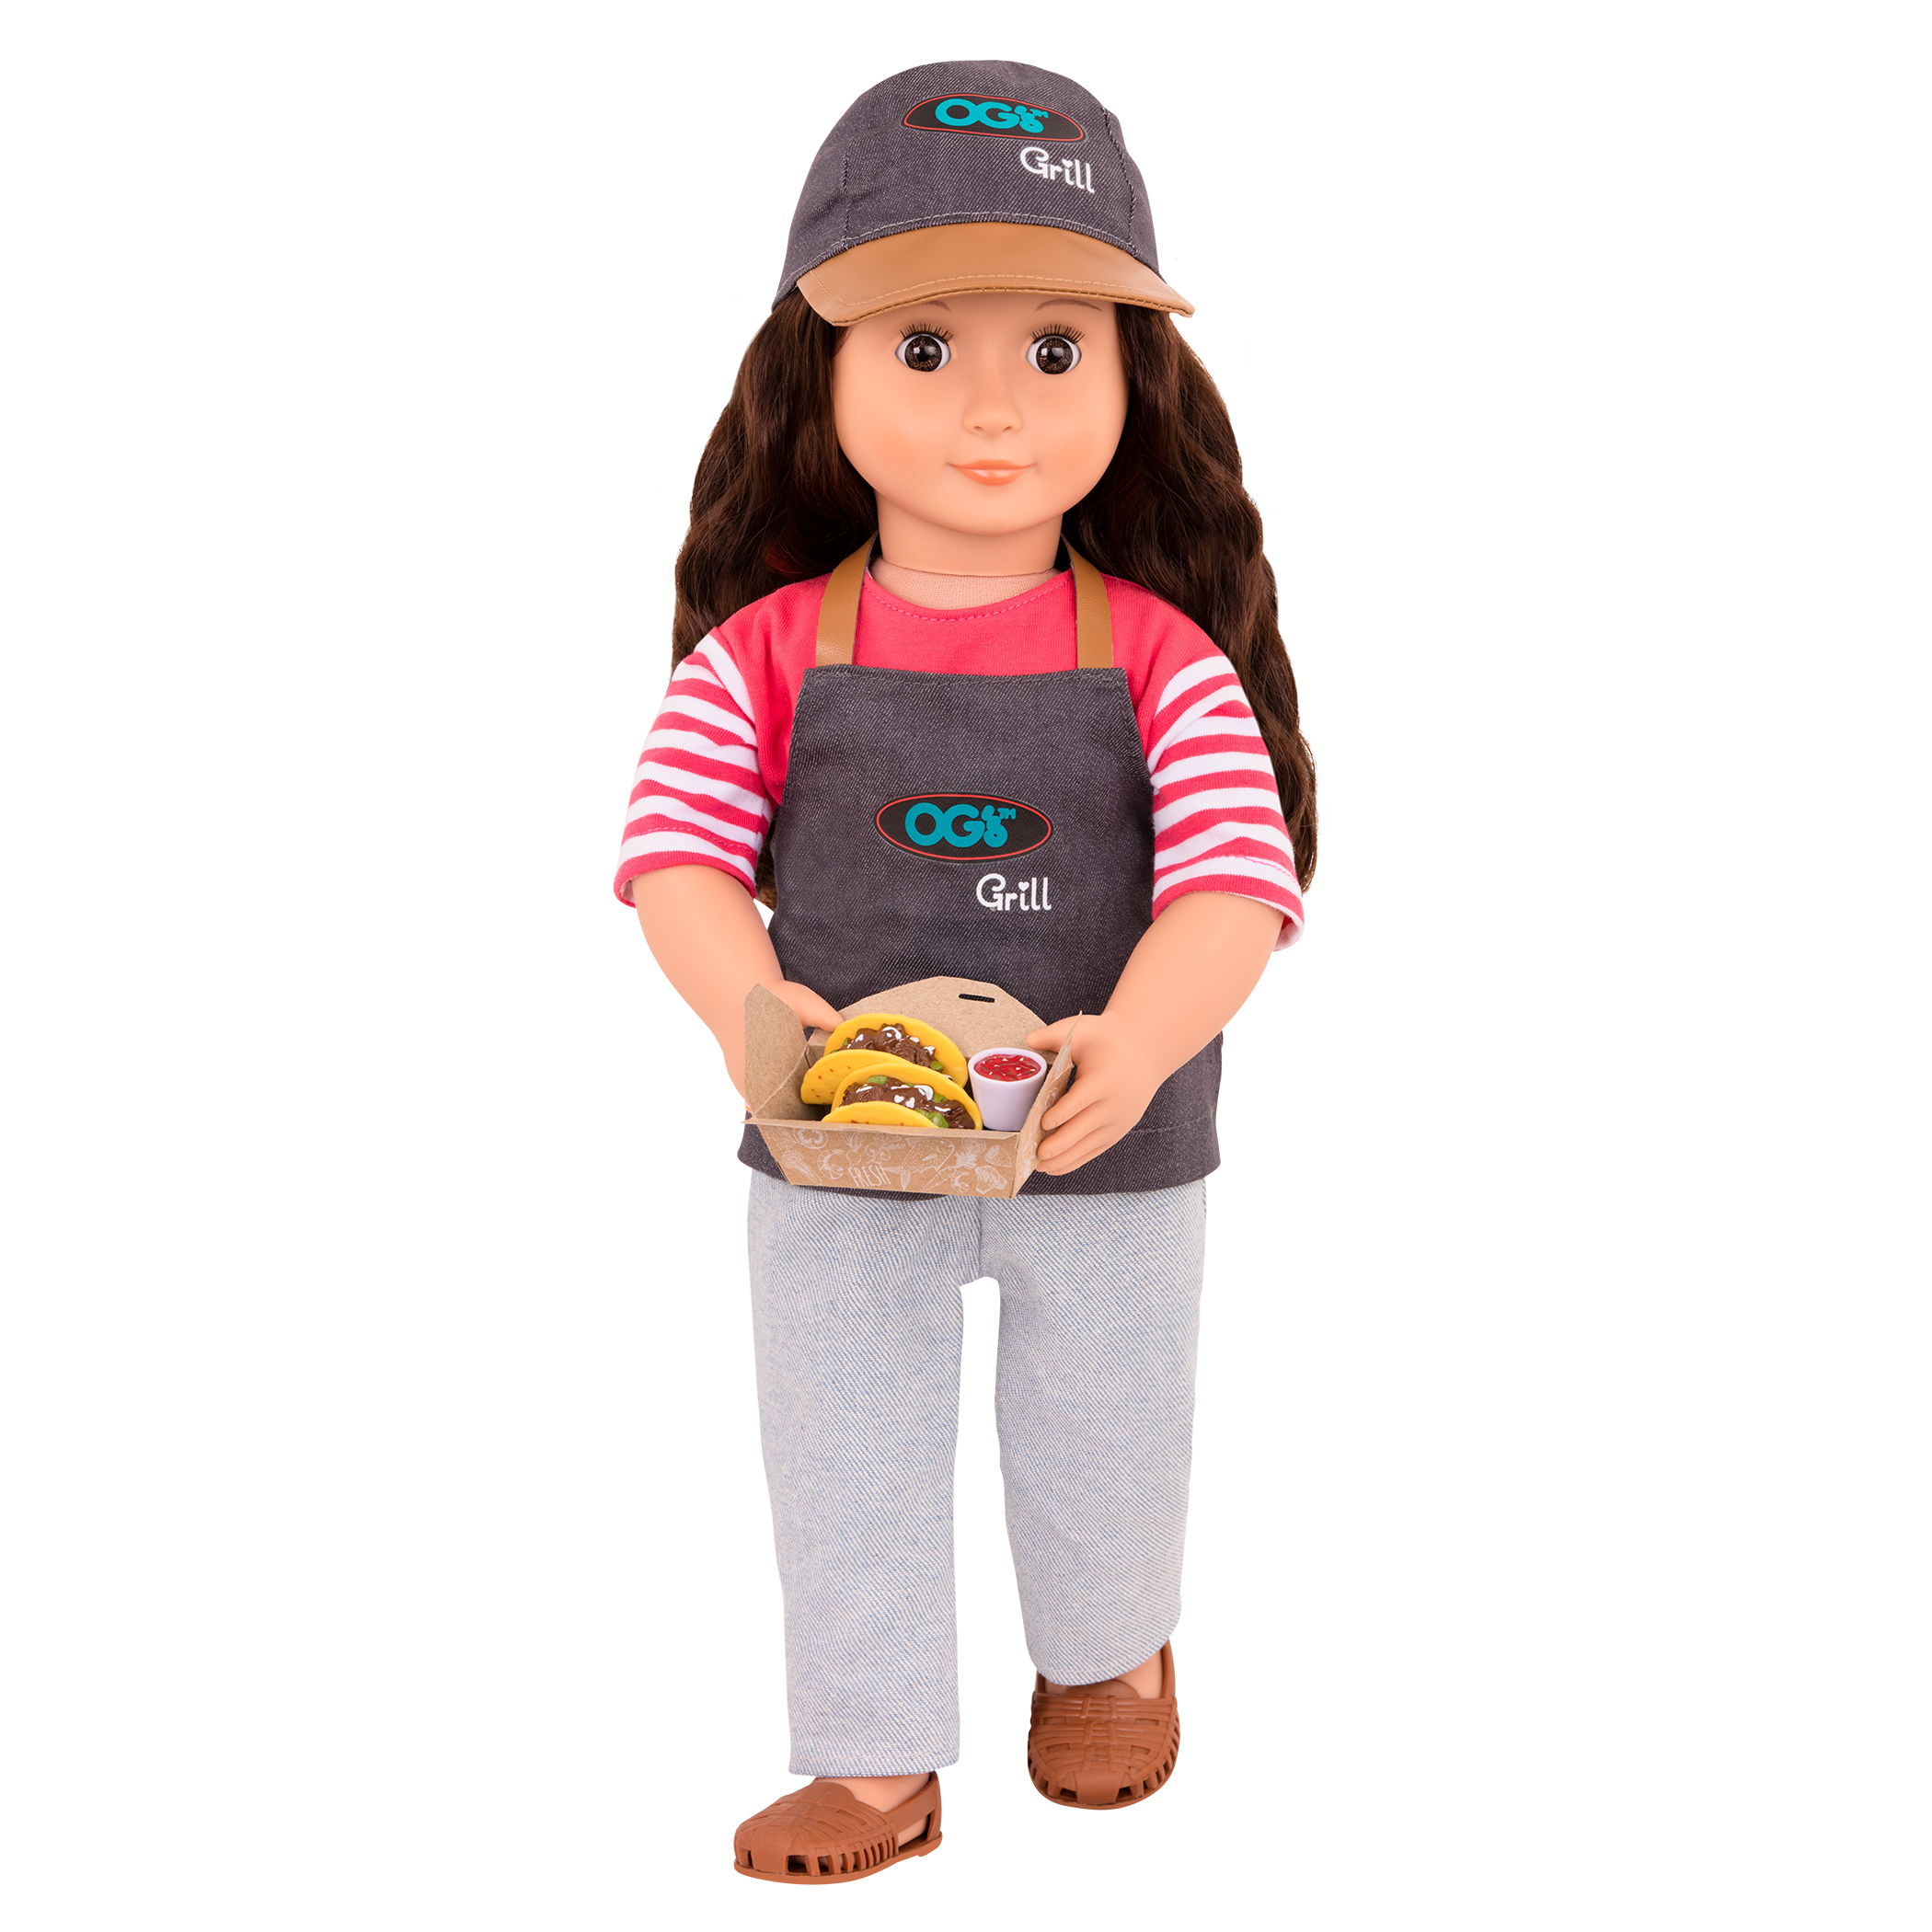 18-inch doll with brown hair, brown eyes, food truck accessories and storybook